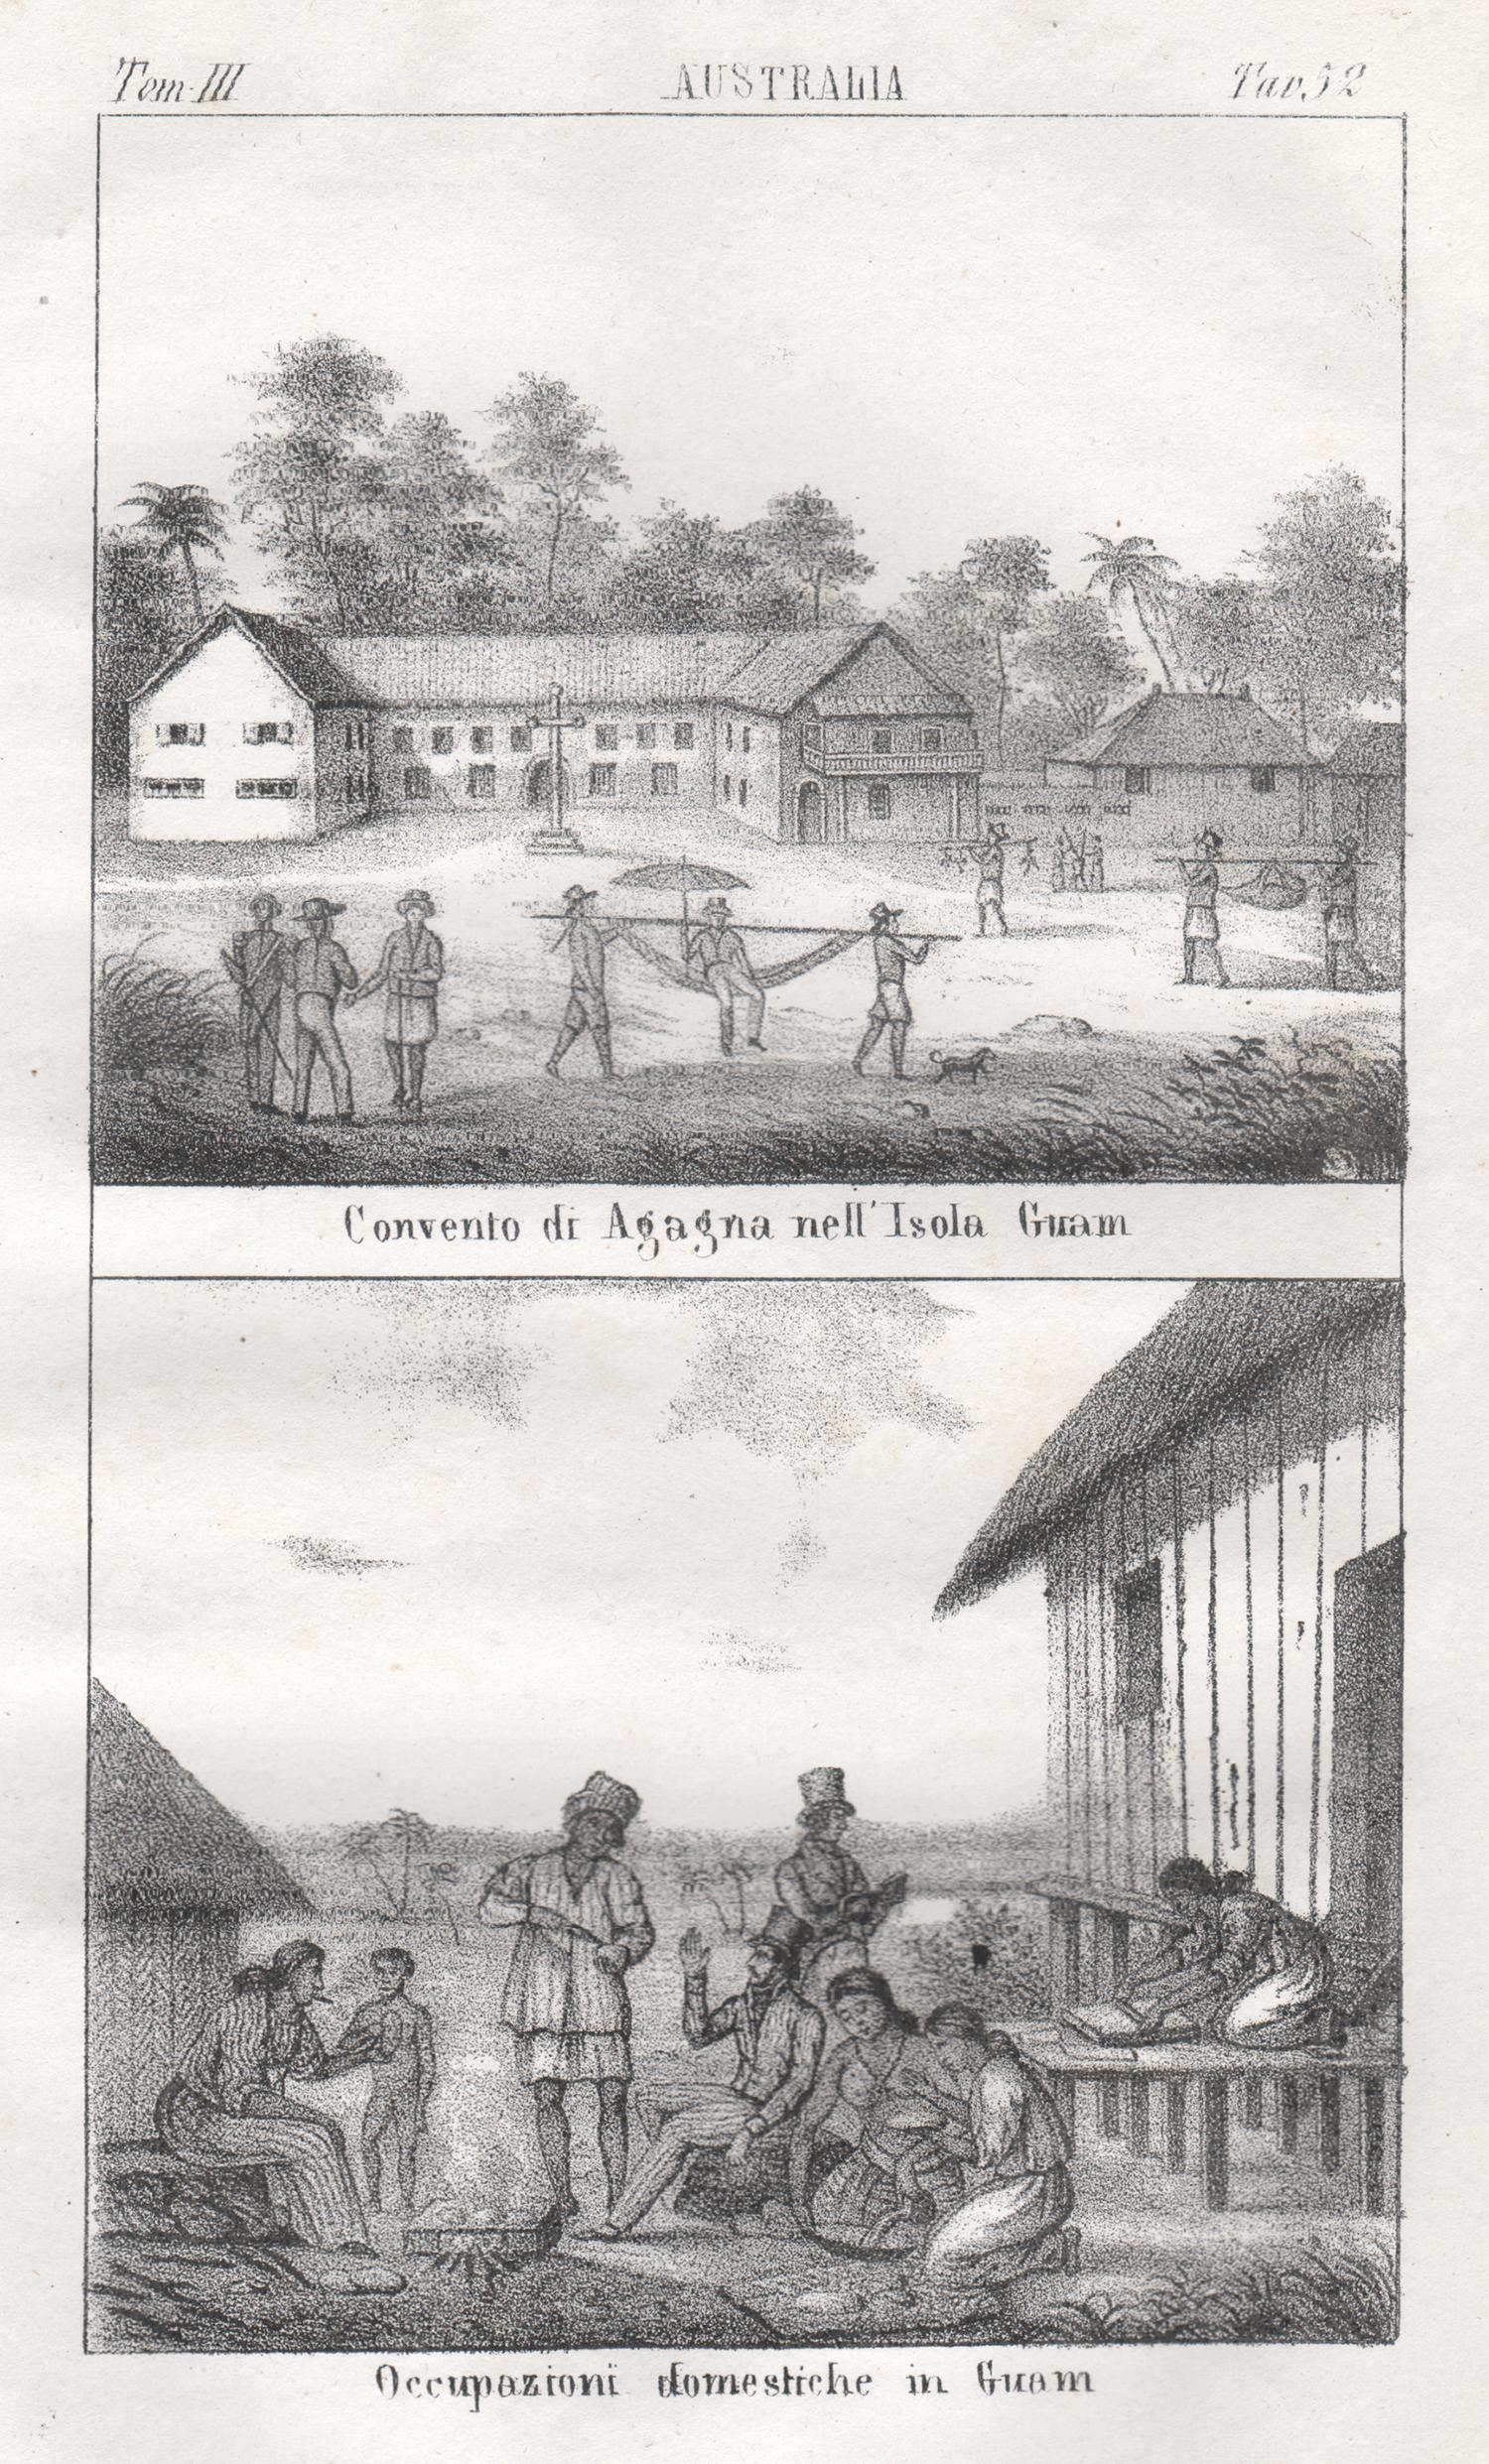 Guam, Convent and native inhabitants, mid 19th century lithograph. Oceania.